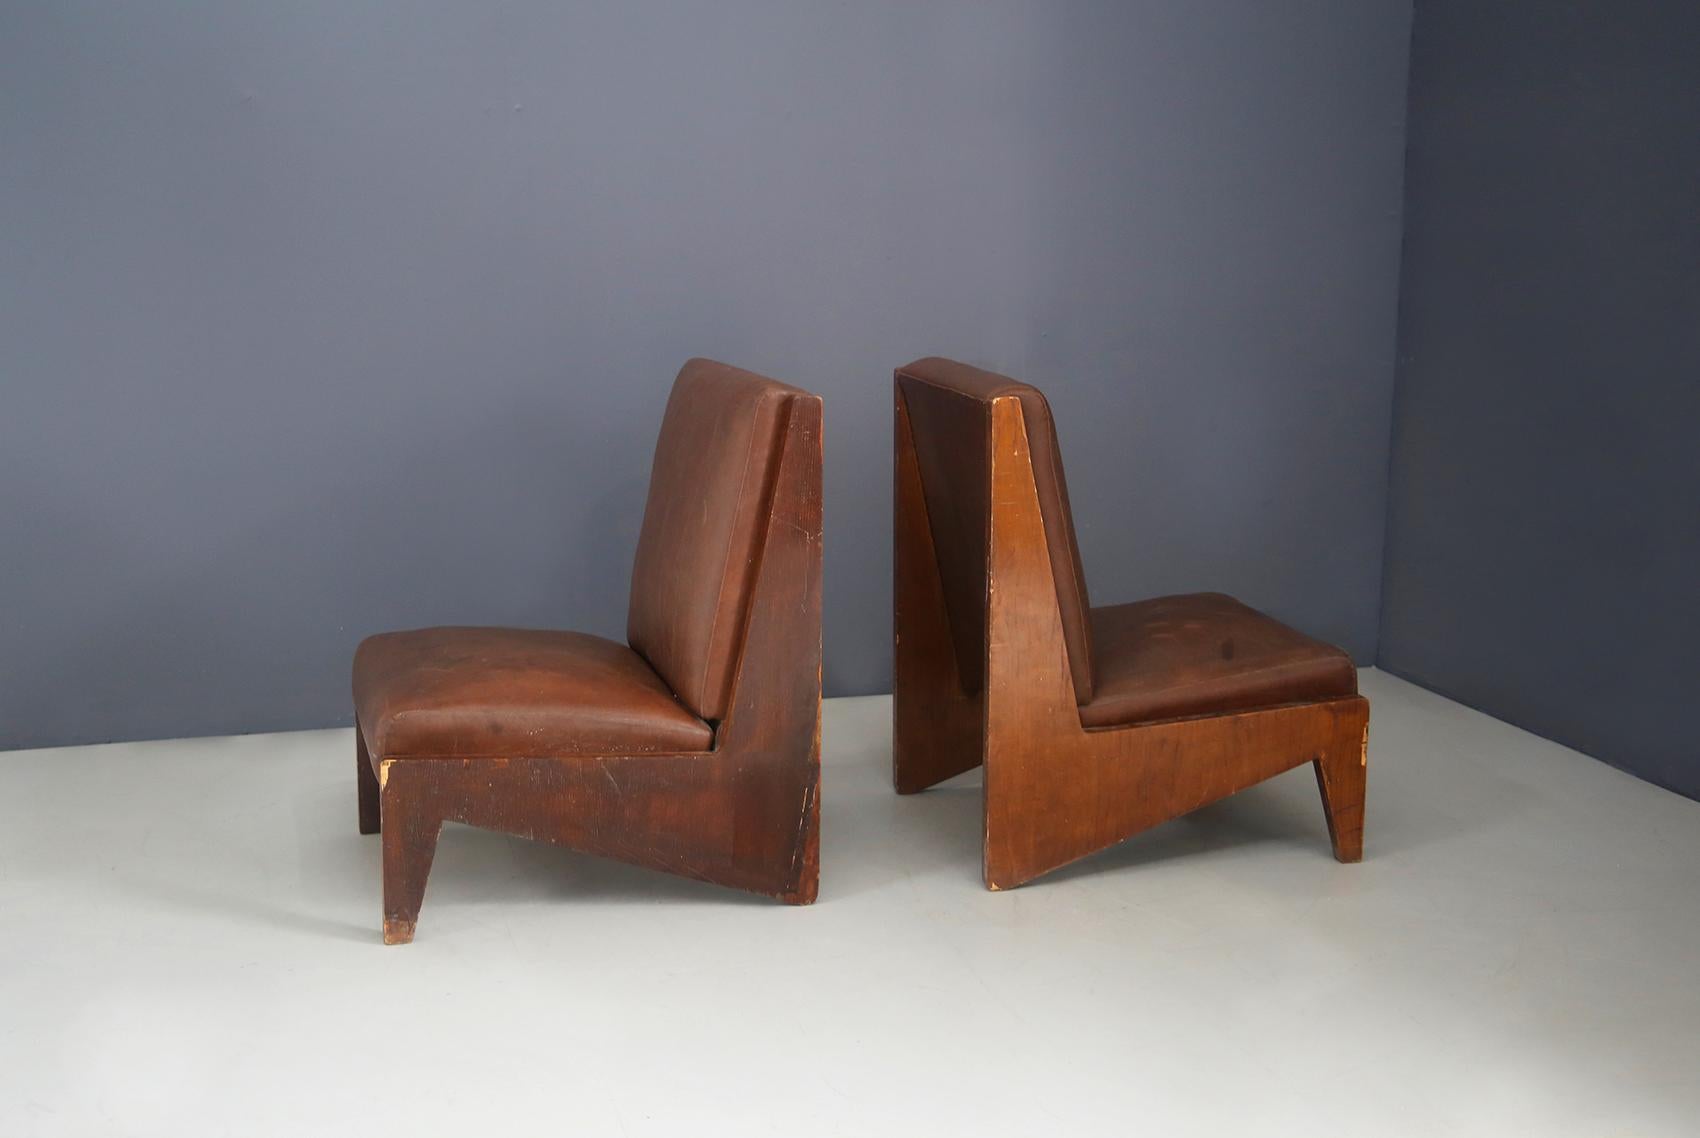 Animal Skin Pair of Midcentury Italian Armchairs Attributed to BBPR in Walnut and Leather